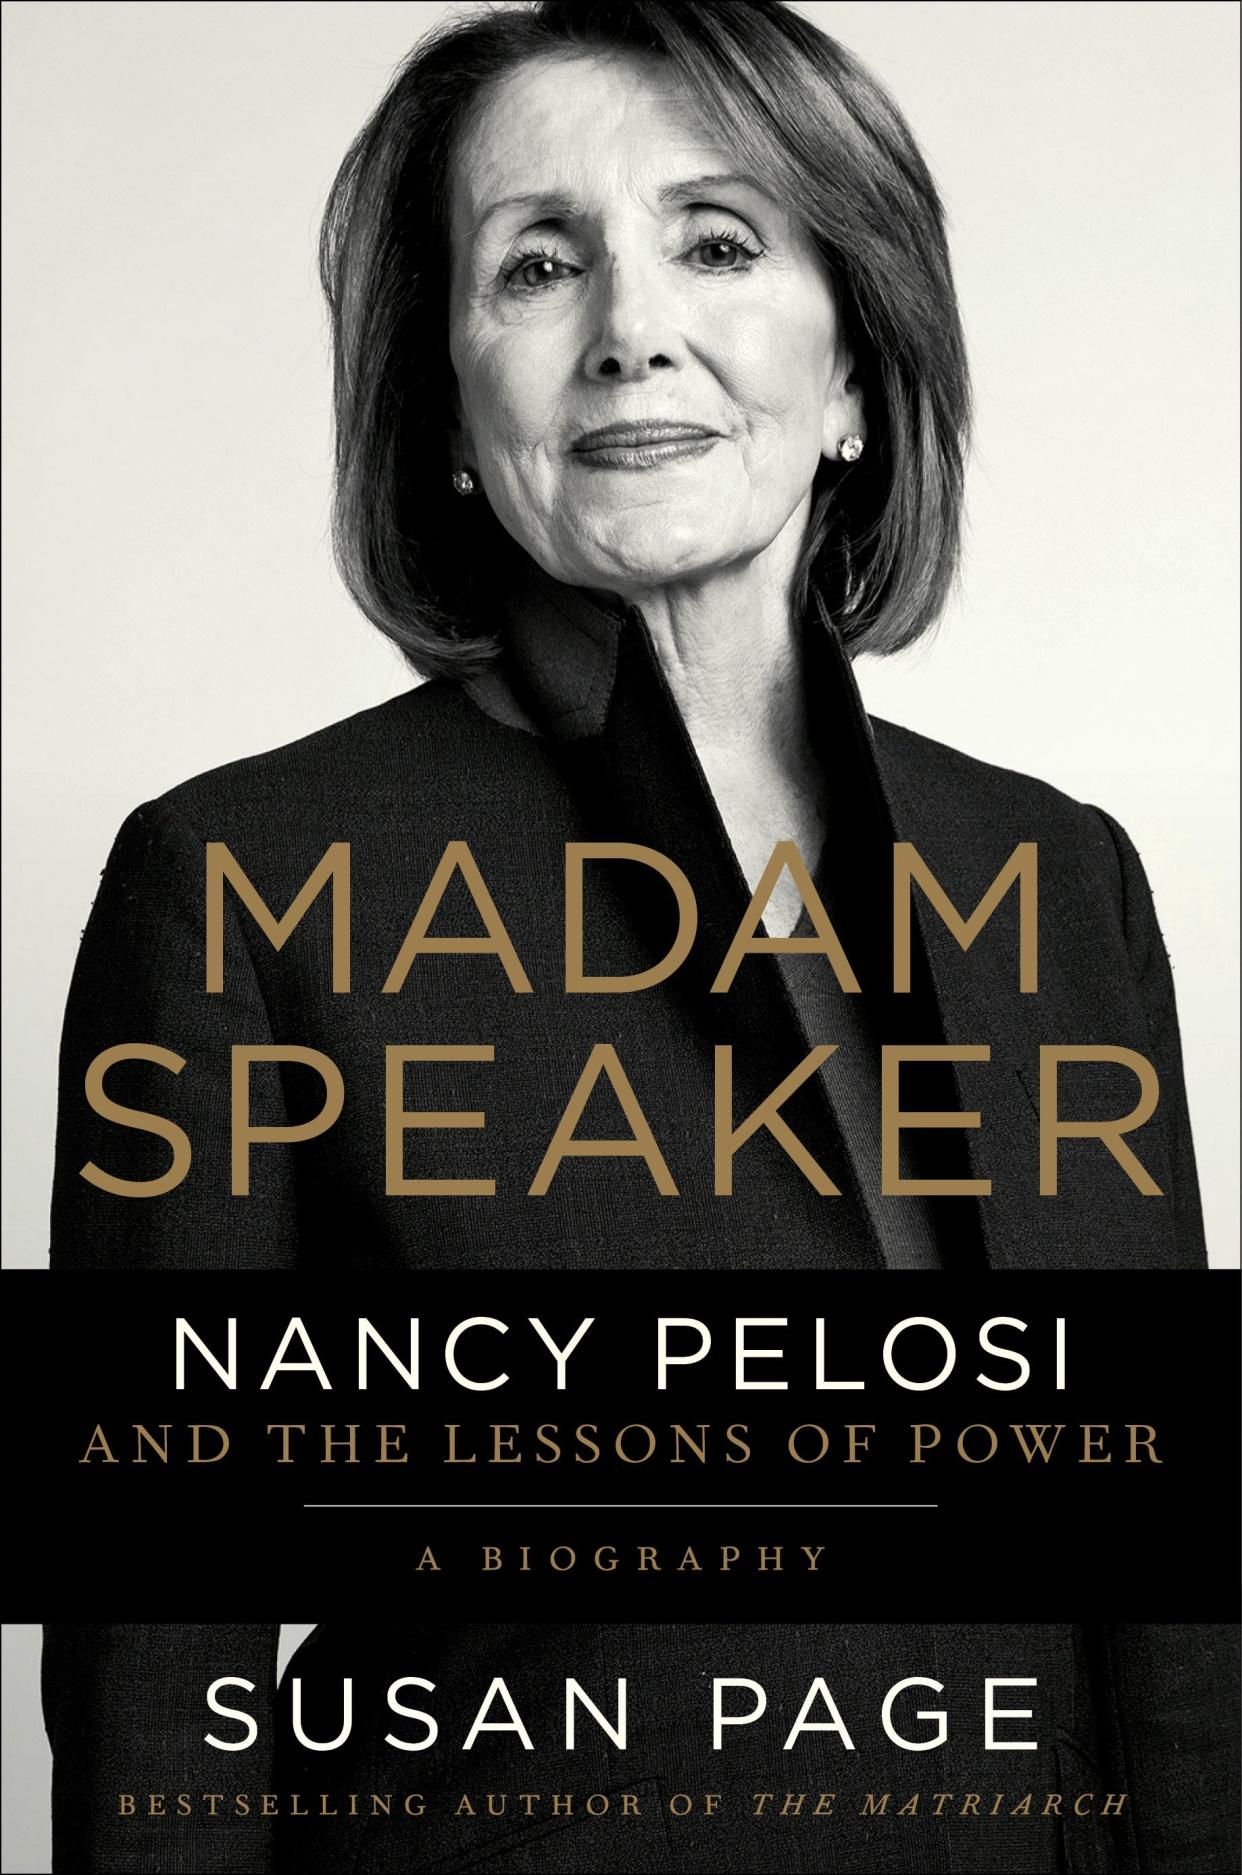 "Madam Speaker: Nancy Pelosi and the Lessons of Power" by Susan Page